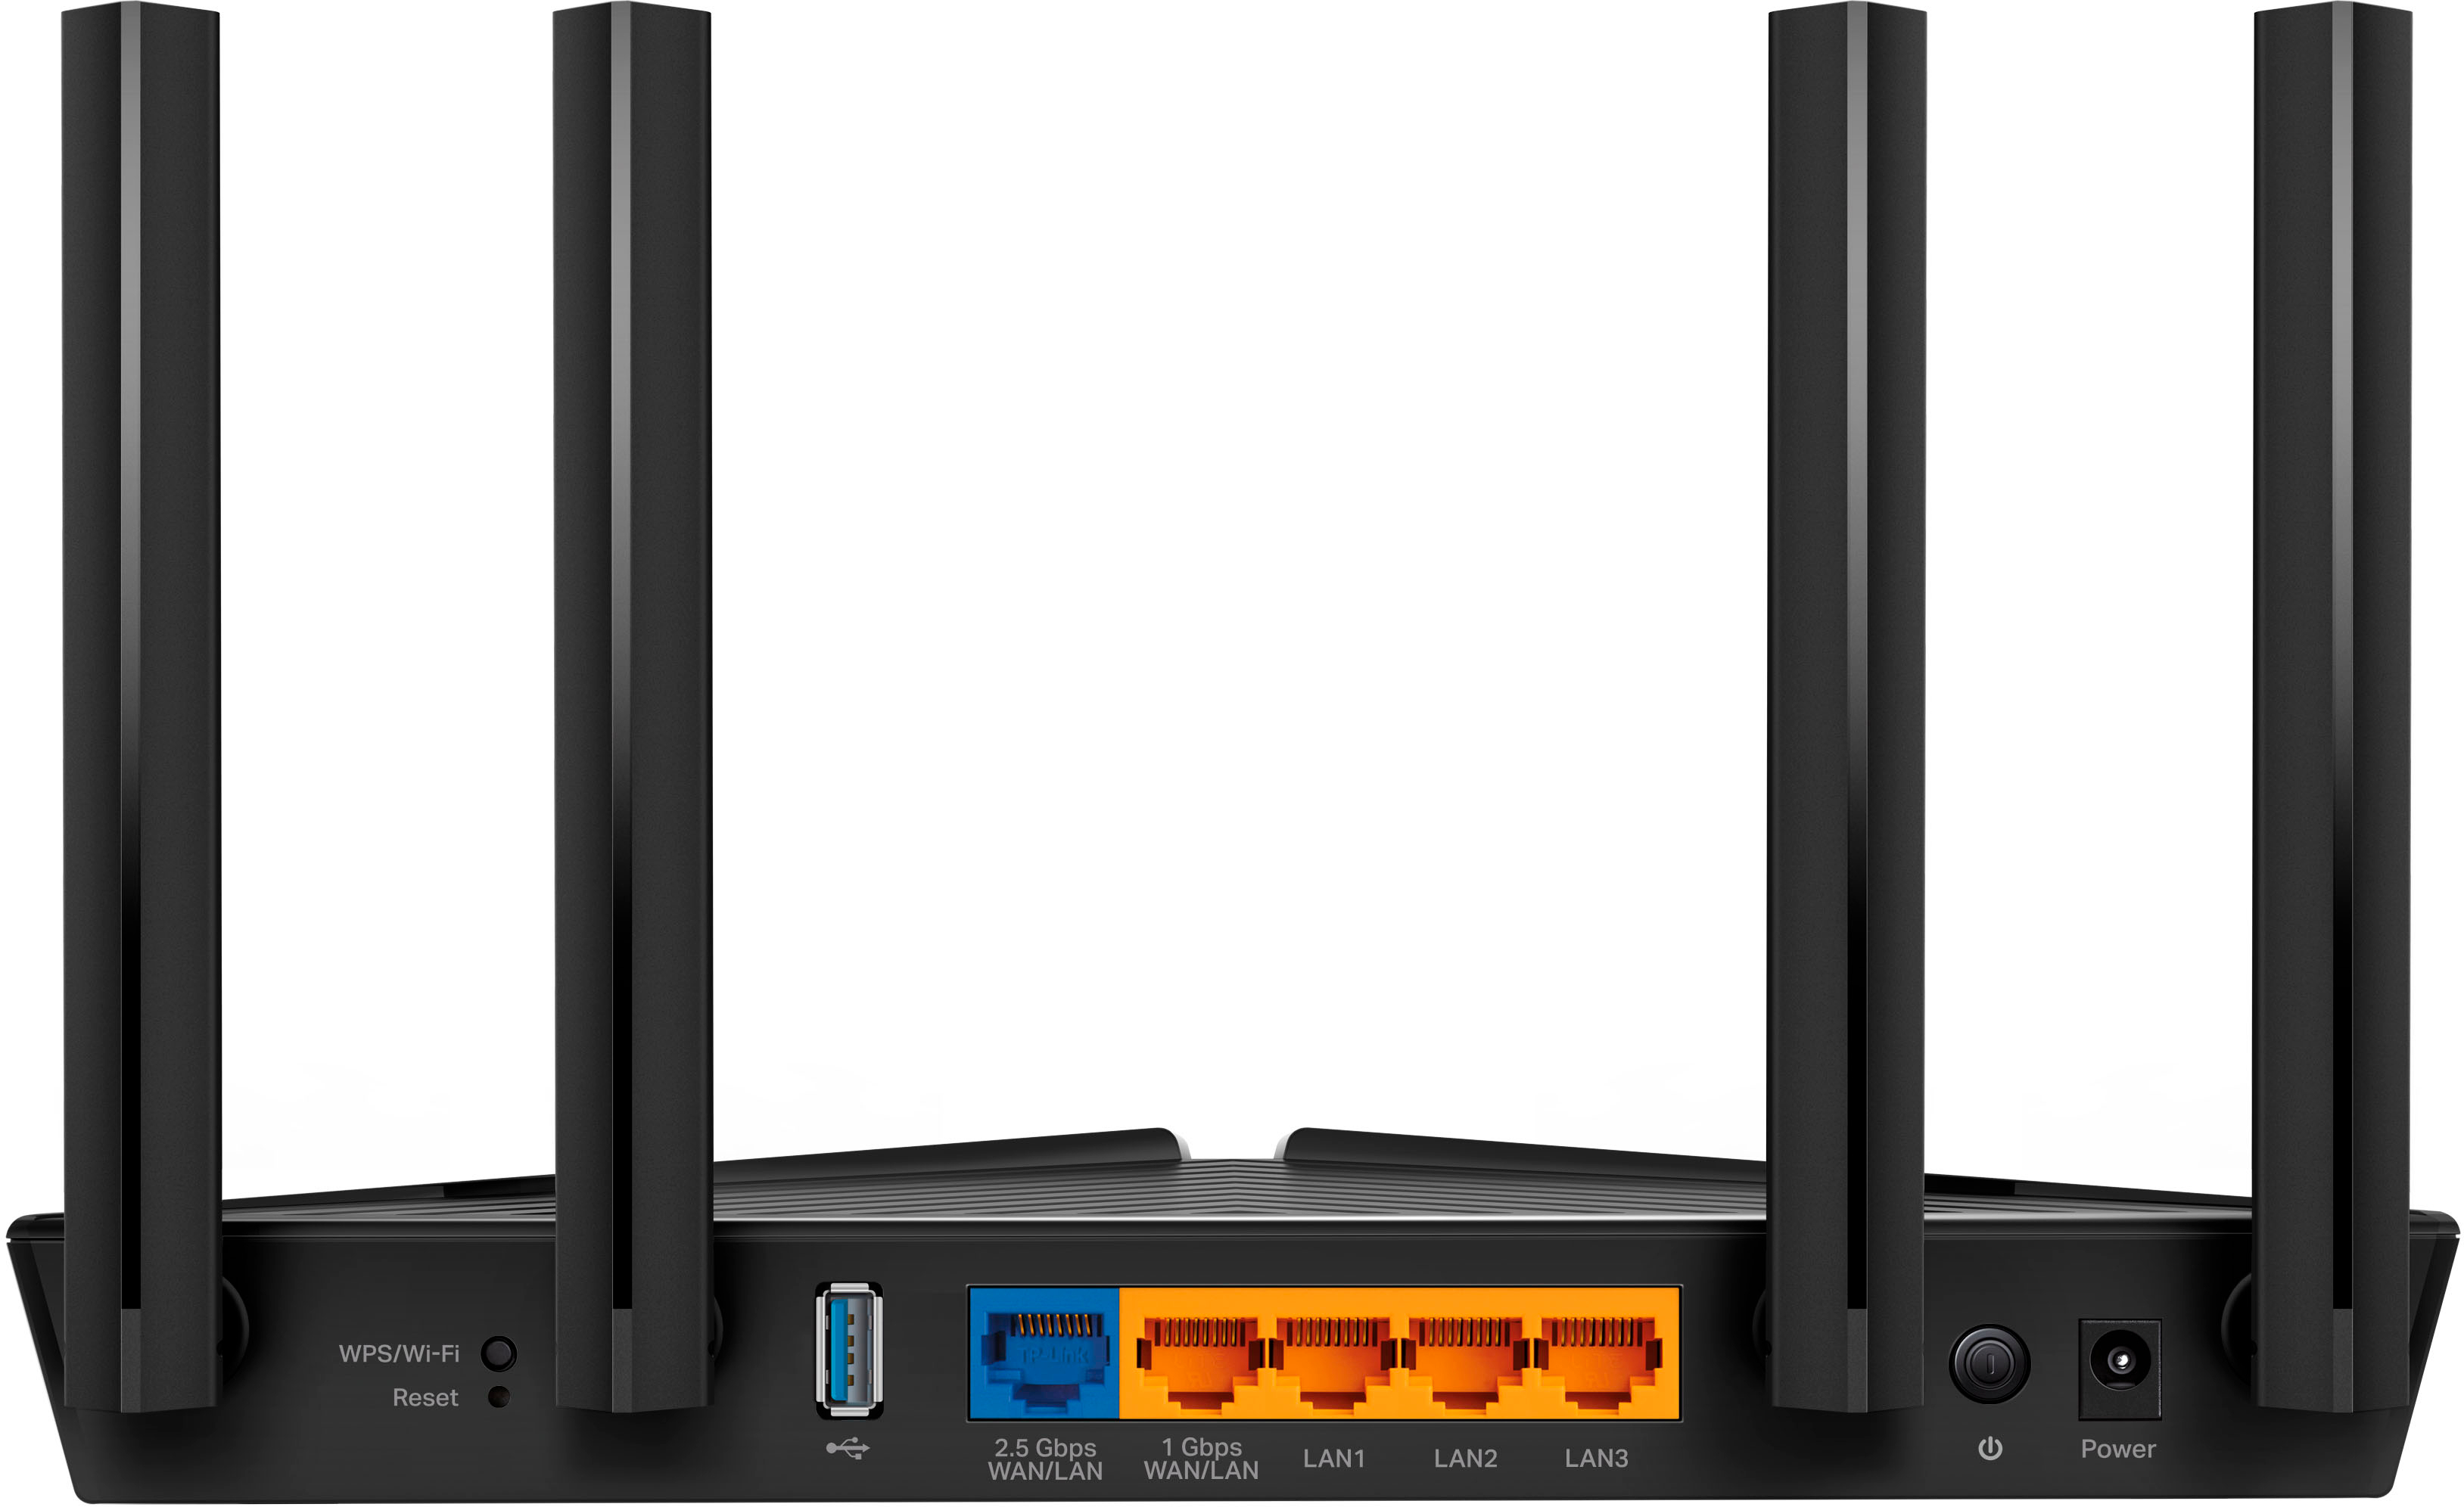 Tp-link Ax3000 Wifi 6 Dual Band Router : Target